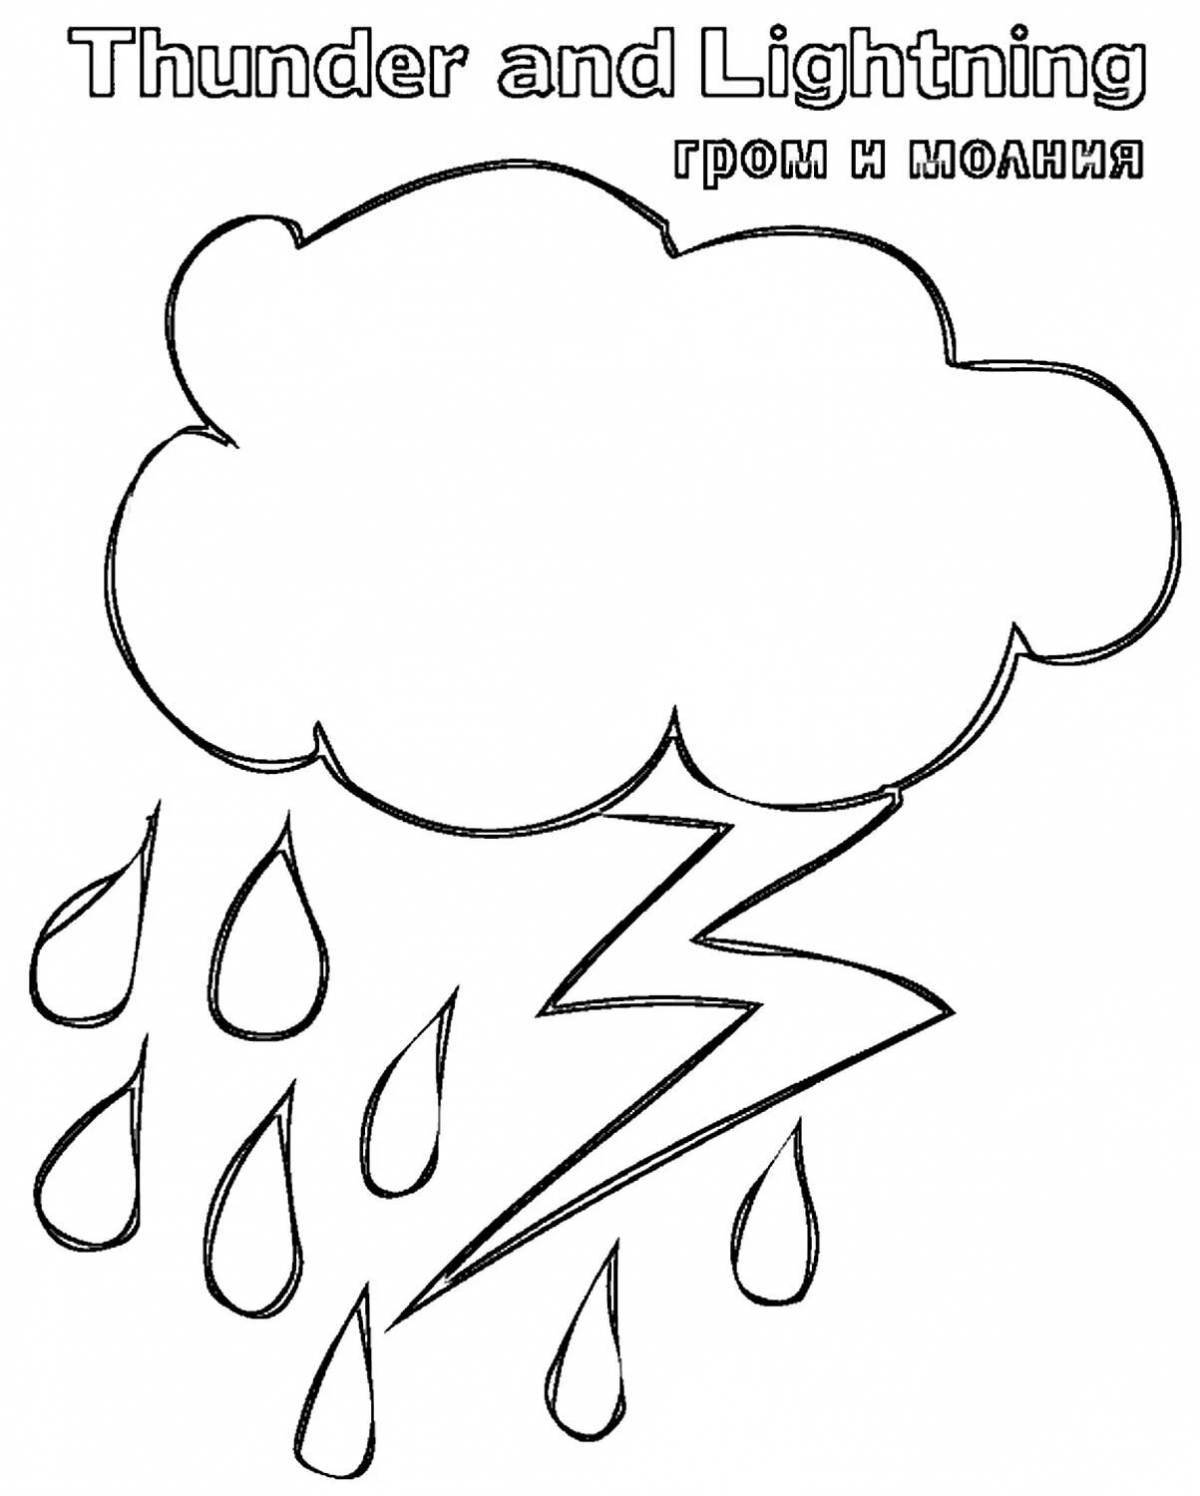 Adorable thunderstorm coloring page for kids